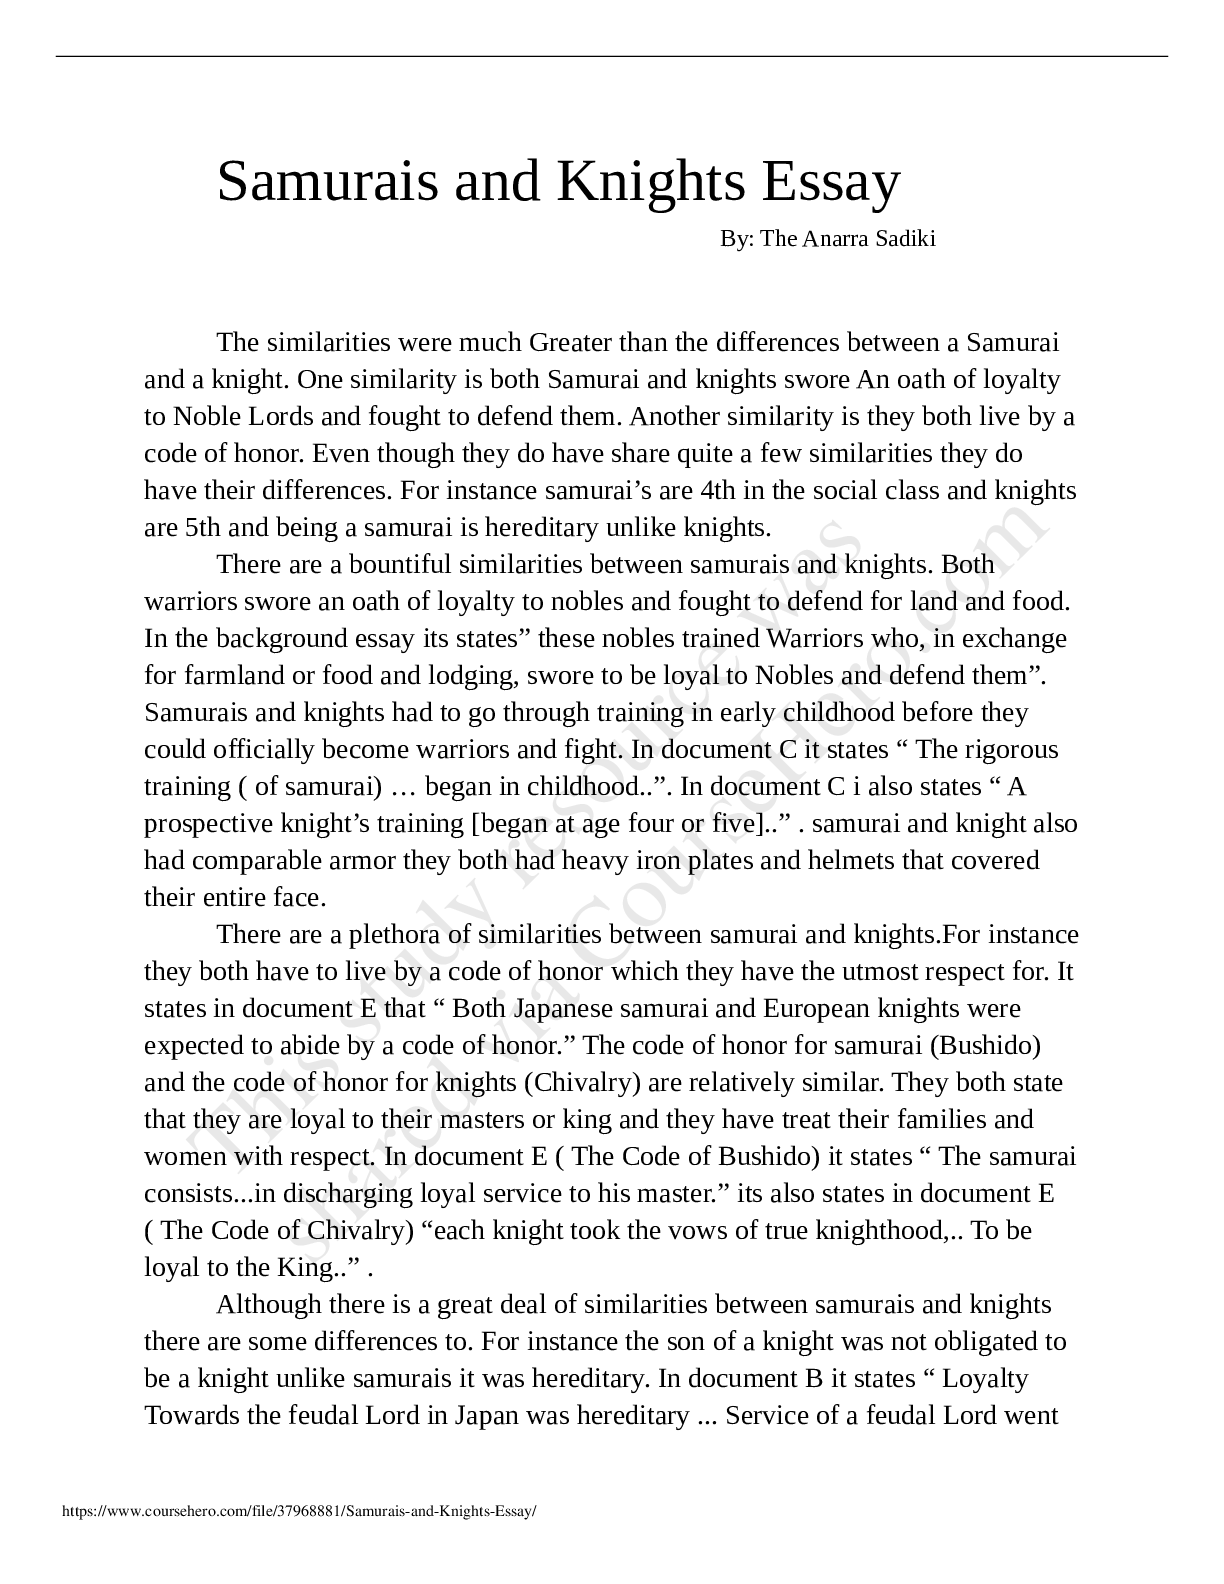 samurai and knights background essay questions